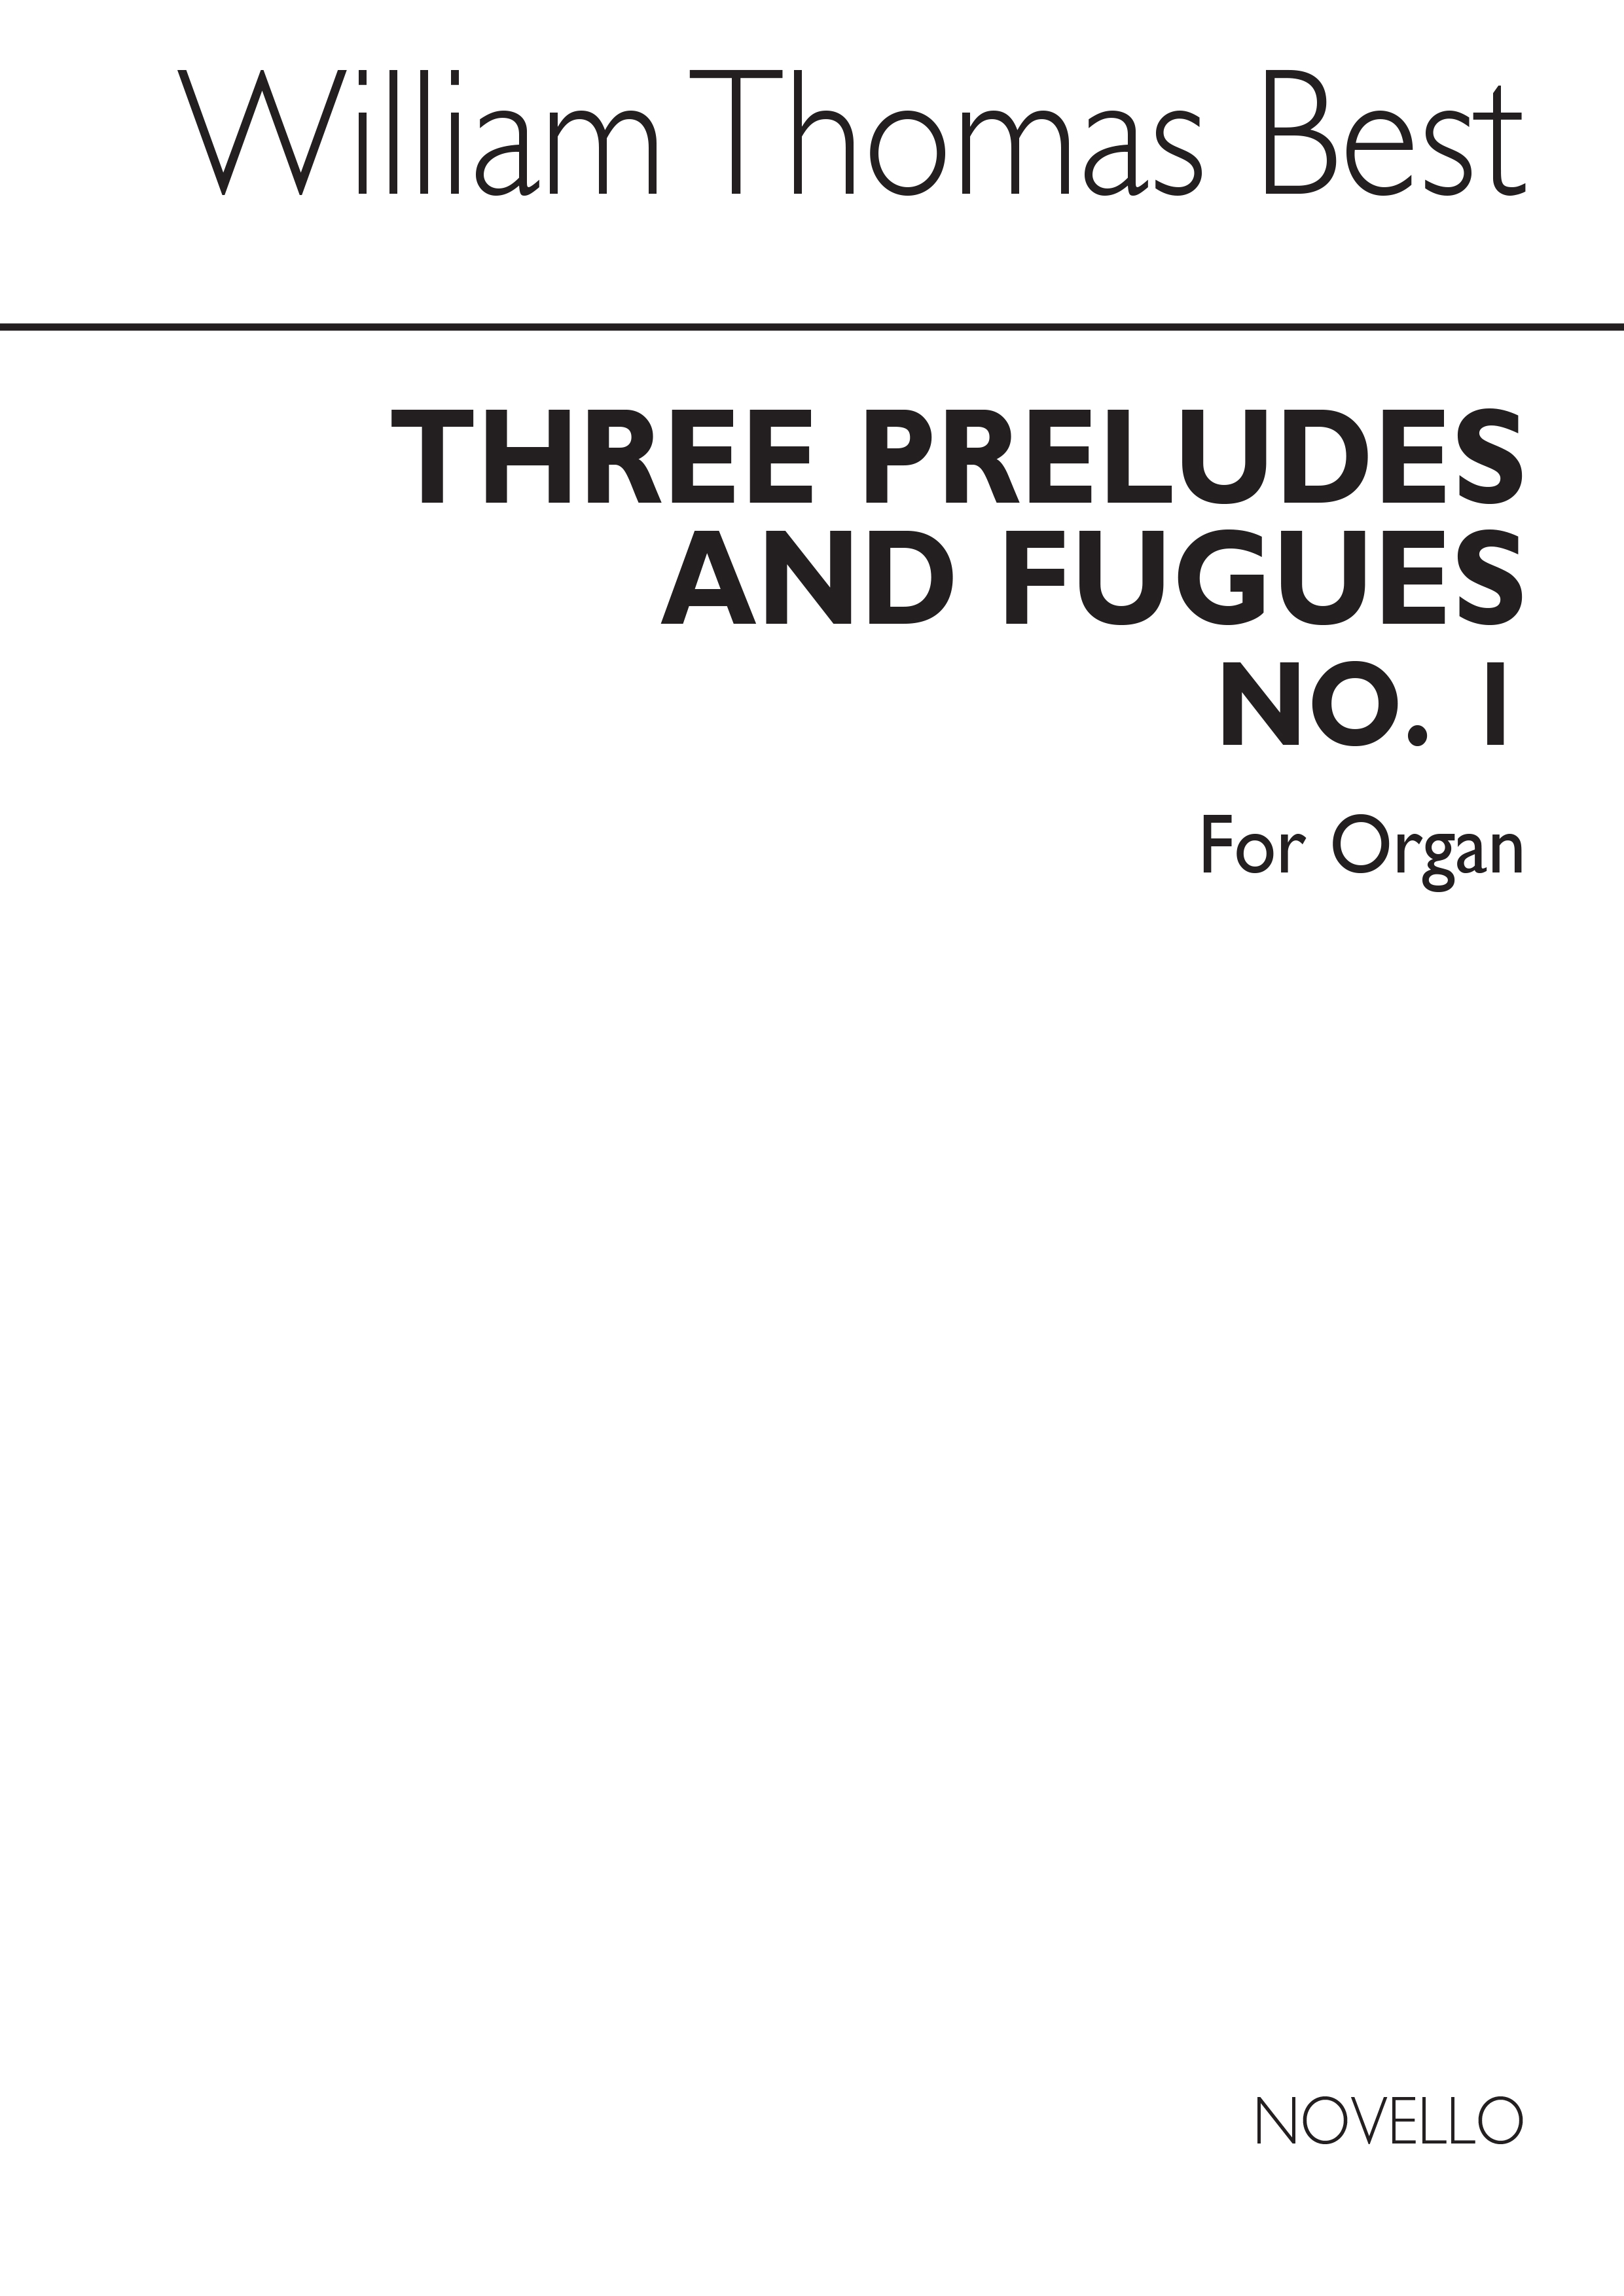 W.T. Best: Prelude And Fugues No.1 In A Minor: Organ: Instrumental Work